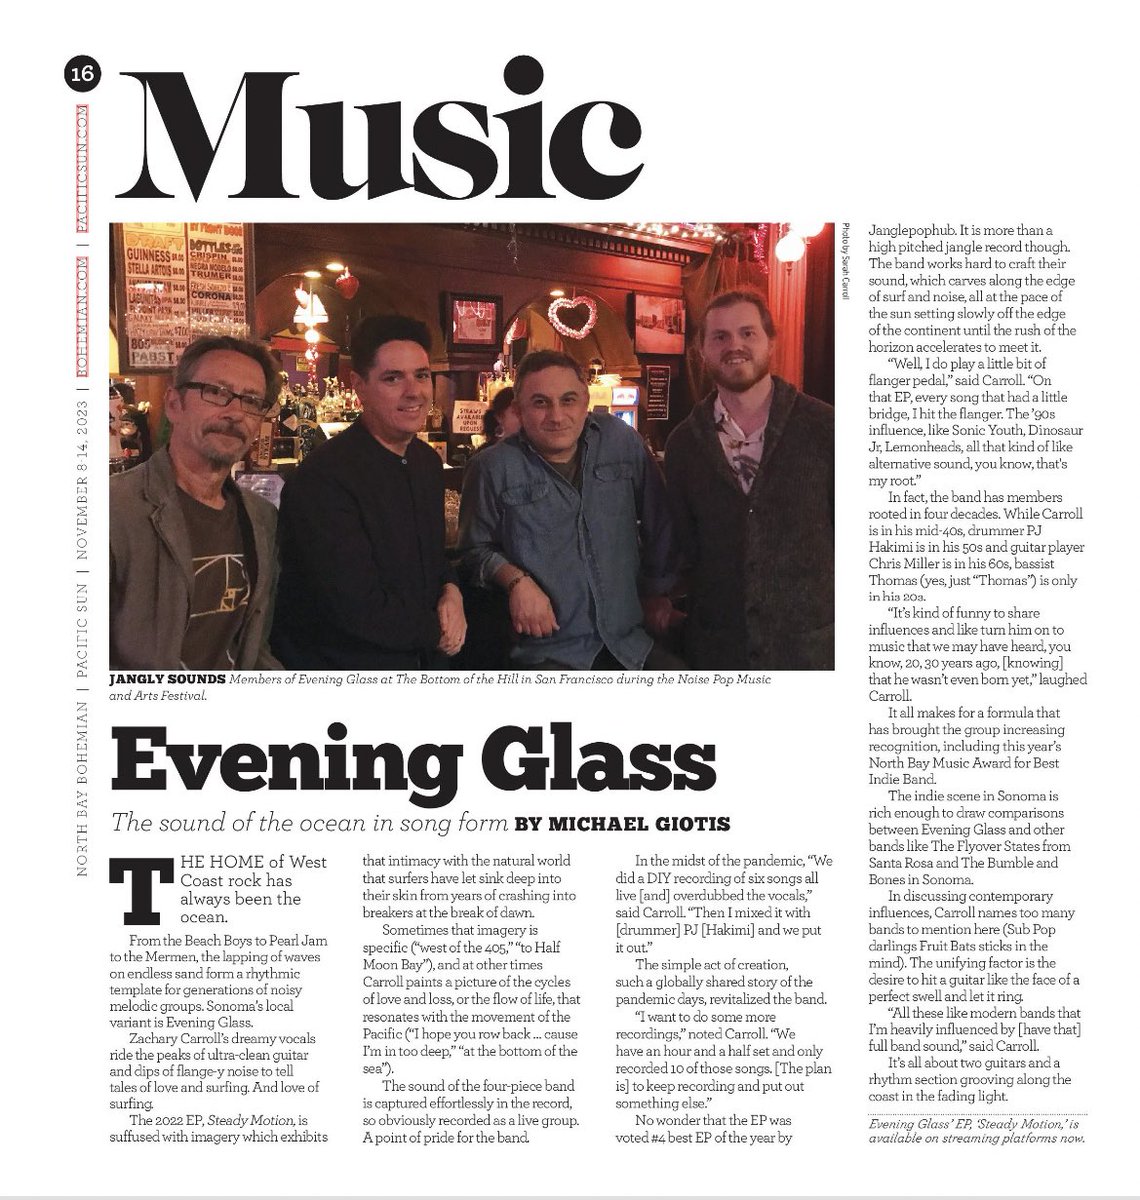 I read the news today, oh boy.
A big feature and interview on Evening Glass in the North Bay Bohemian. #musicjournalism #indierock #musicreview #exposé #bayareamusic #sonomamusic #napamusic #sanfrancsicomusic #californiamusic #westcostmusic
bohemian.com/evening-glass/